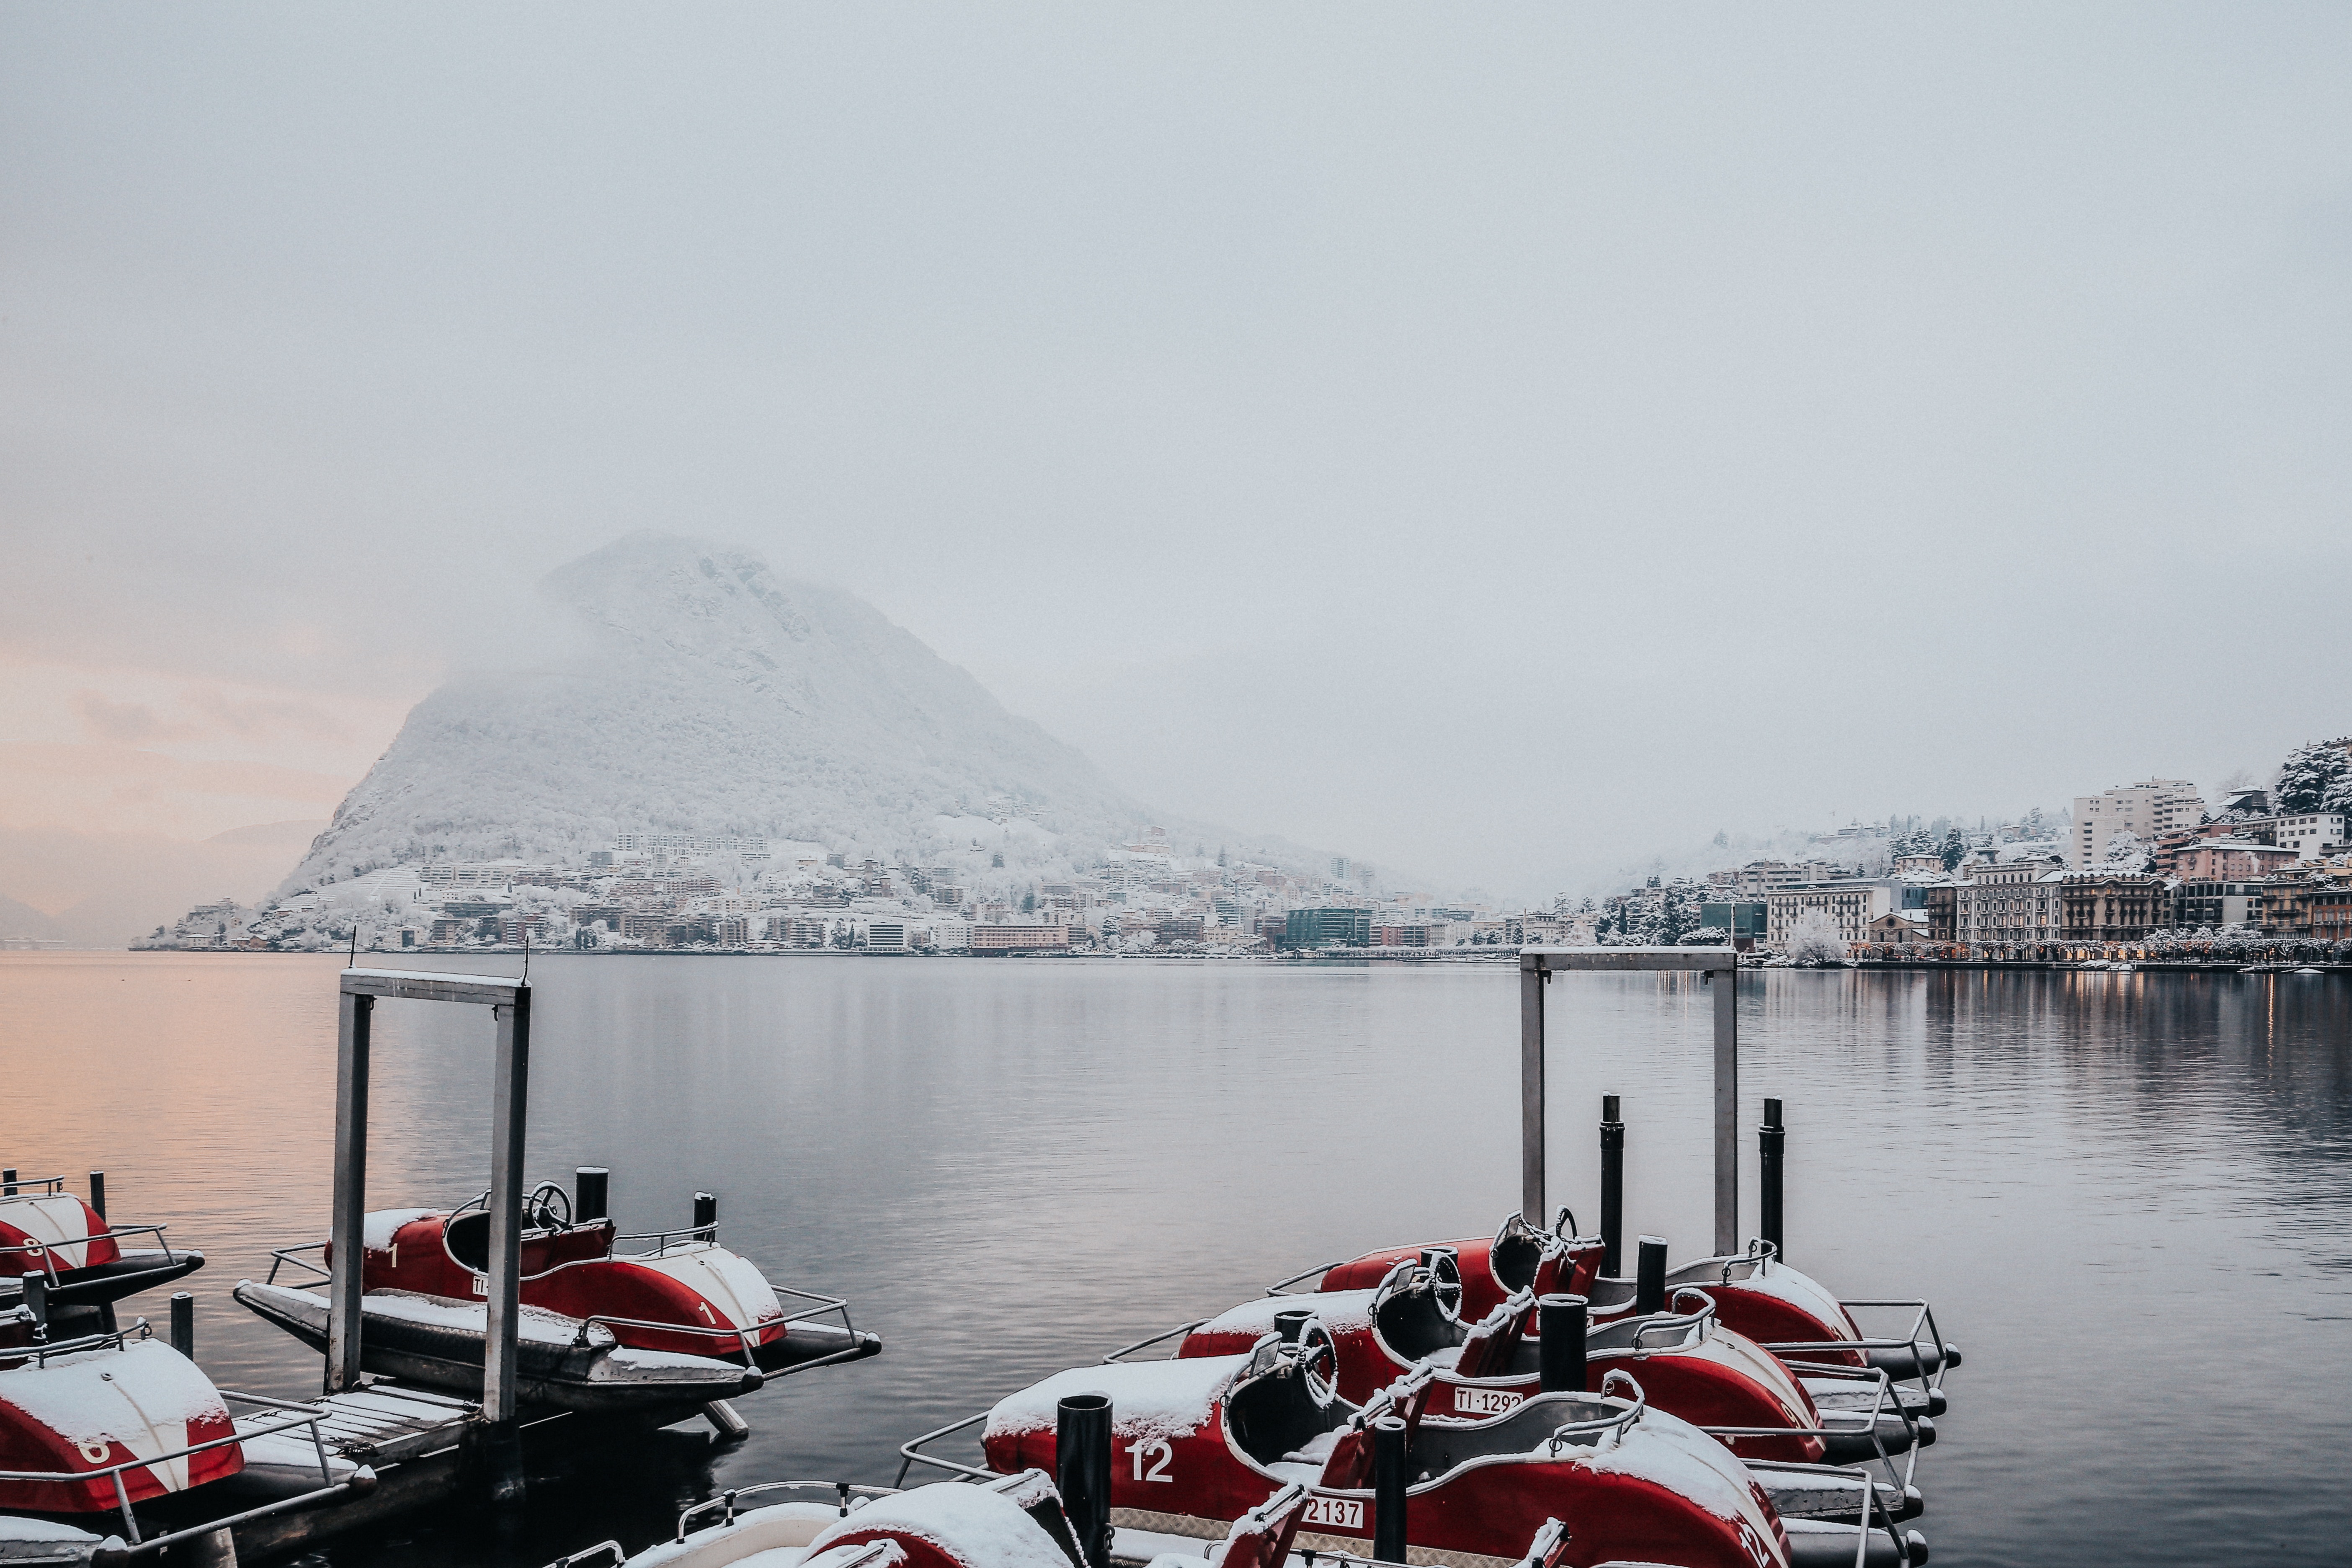 White and red boats on dock near white snowy mountain photo